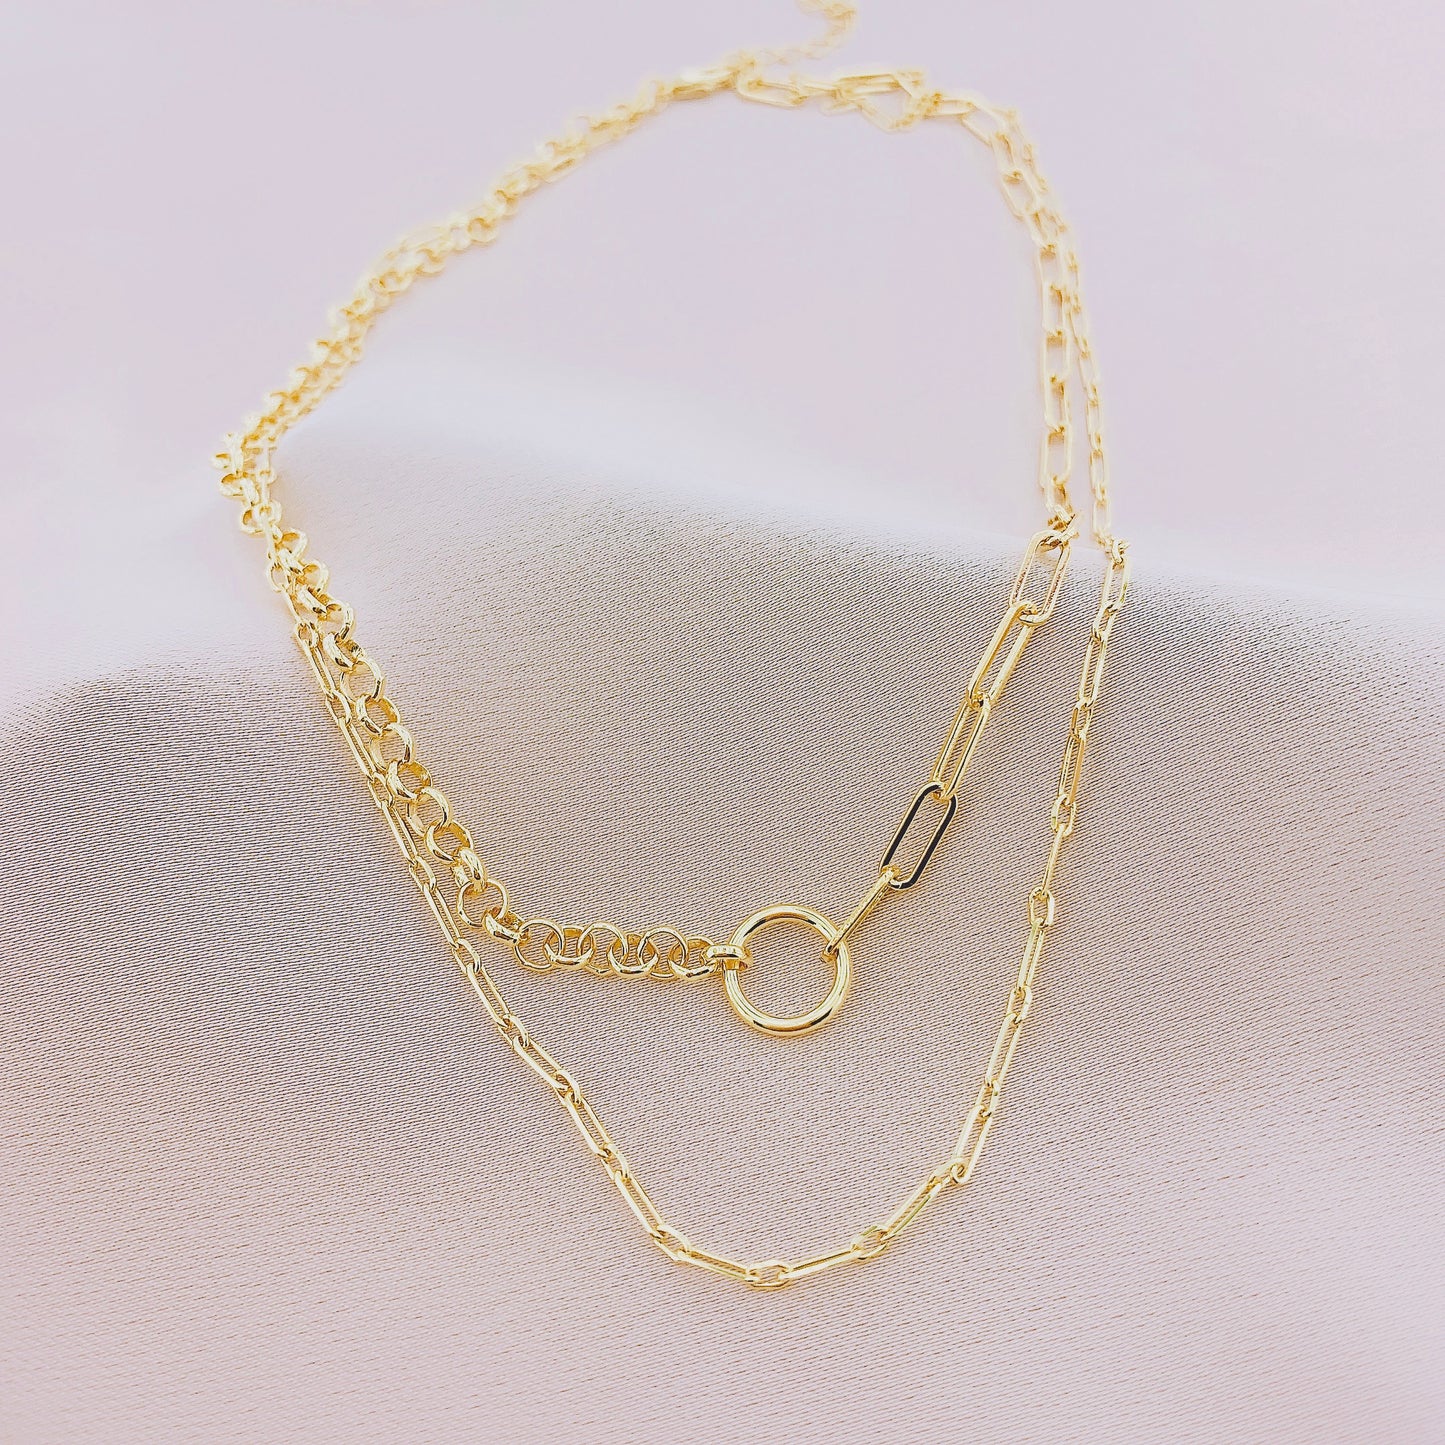 Women's Long Layer Chain Necklace